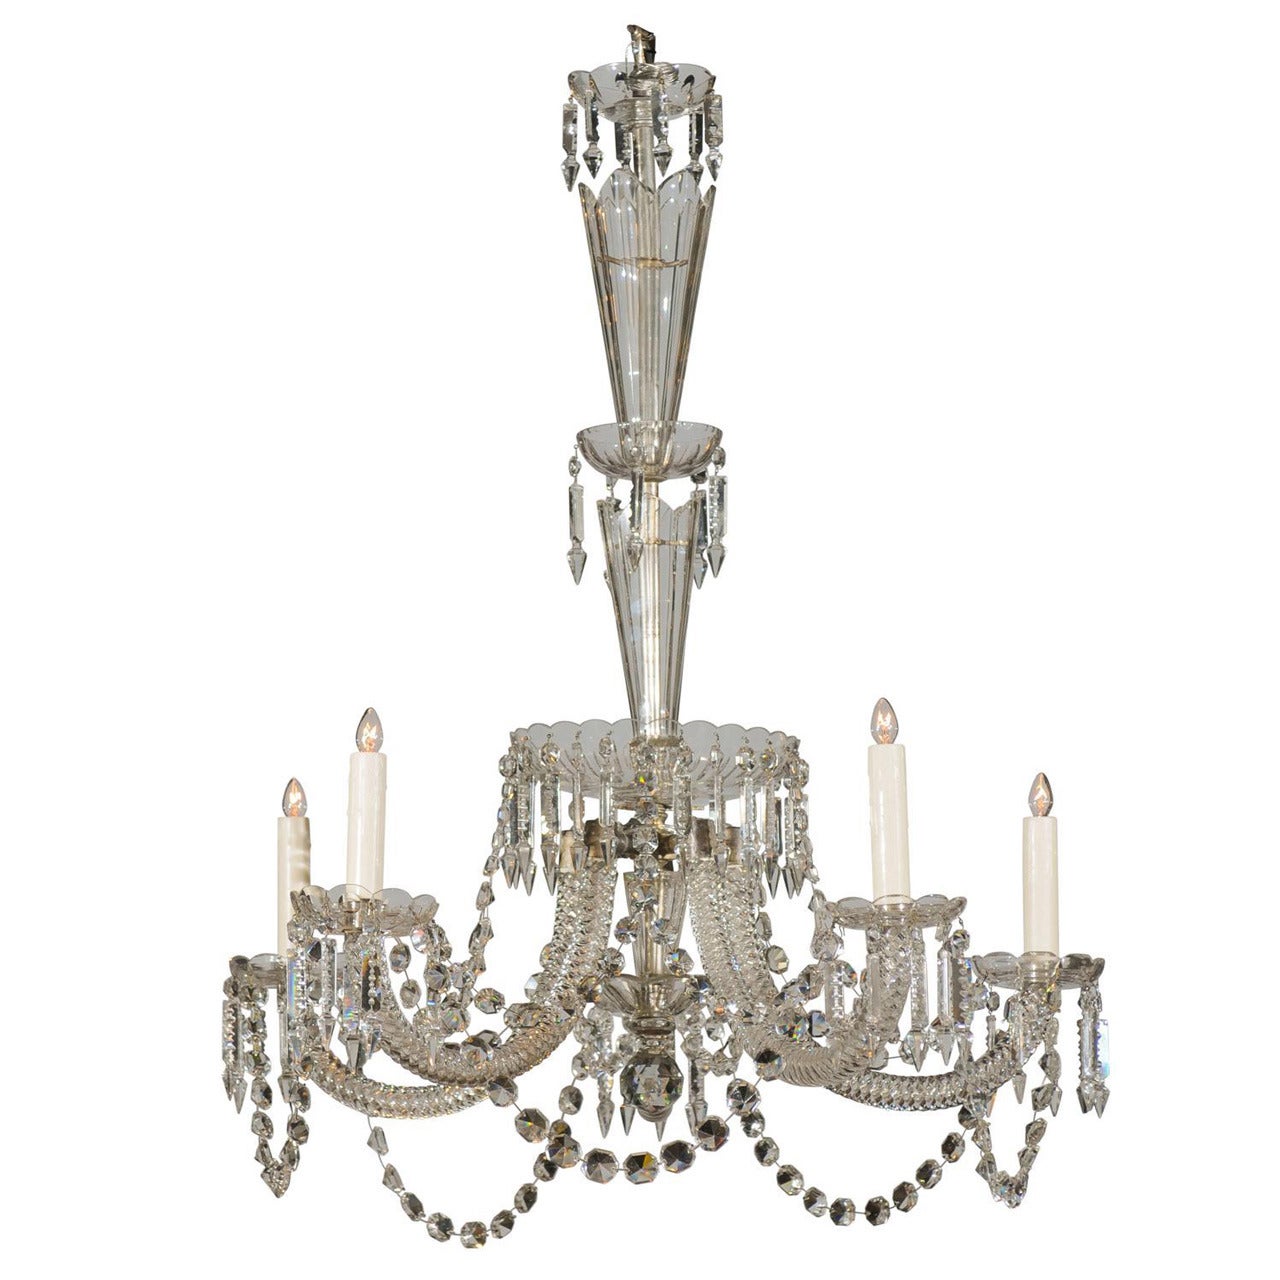 Five-Light Belgian Crystal Fountain-Like Chandelier from the 19th Century For Sale